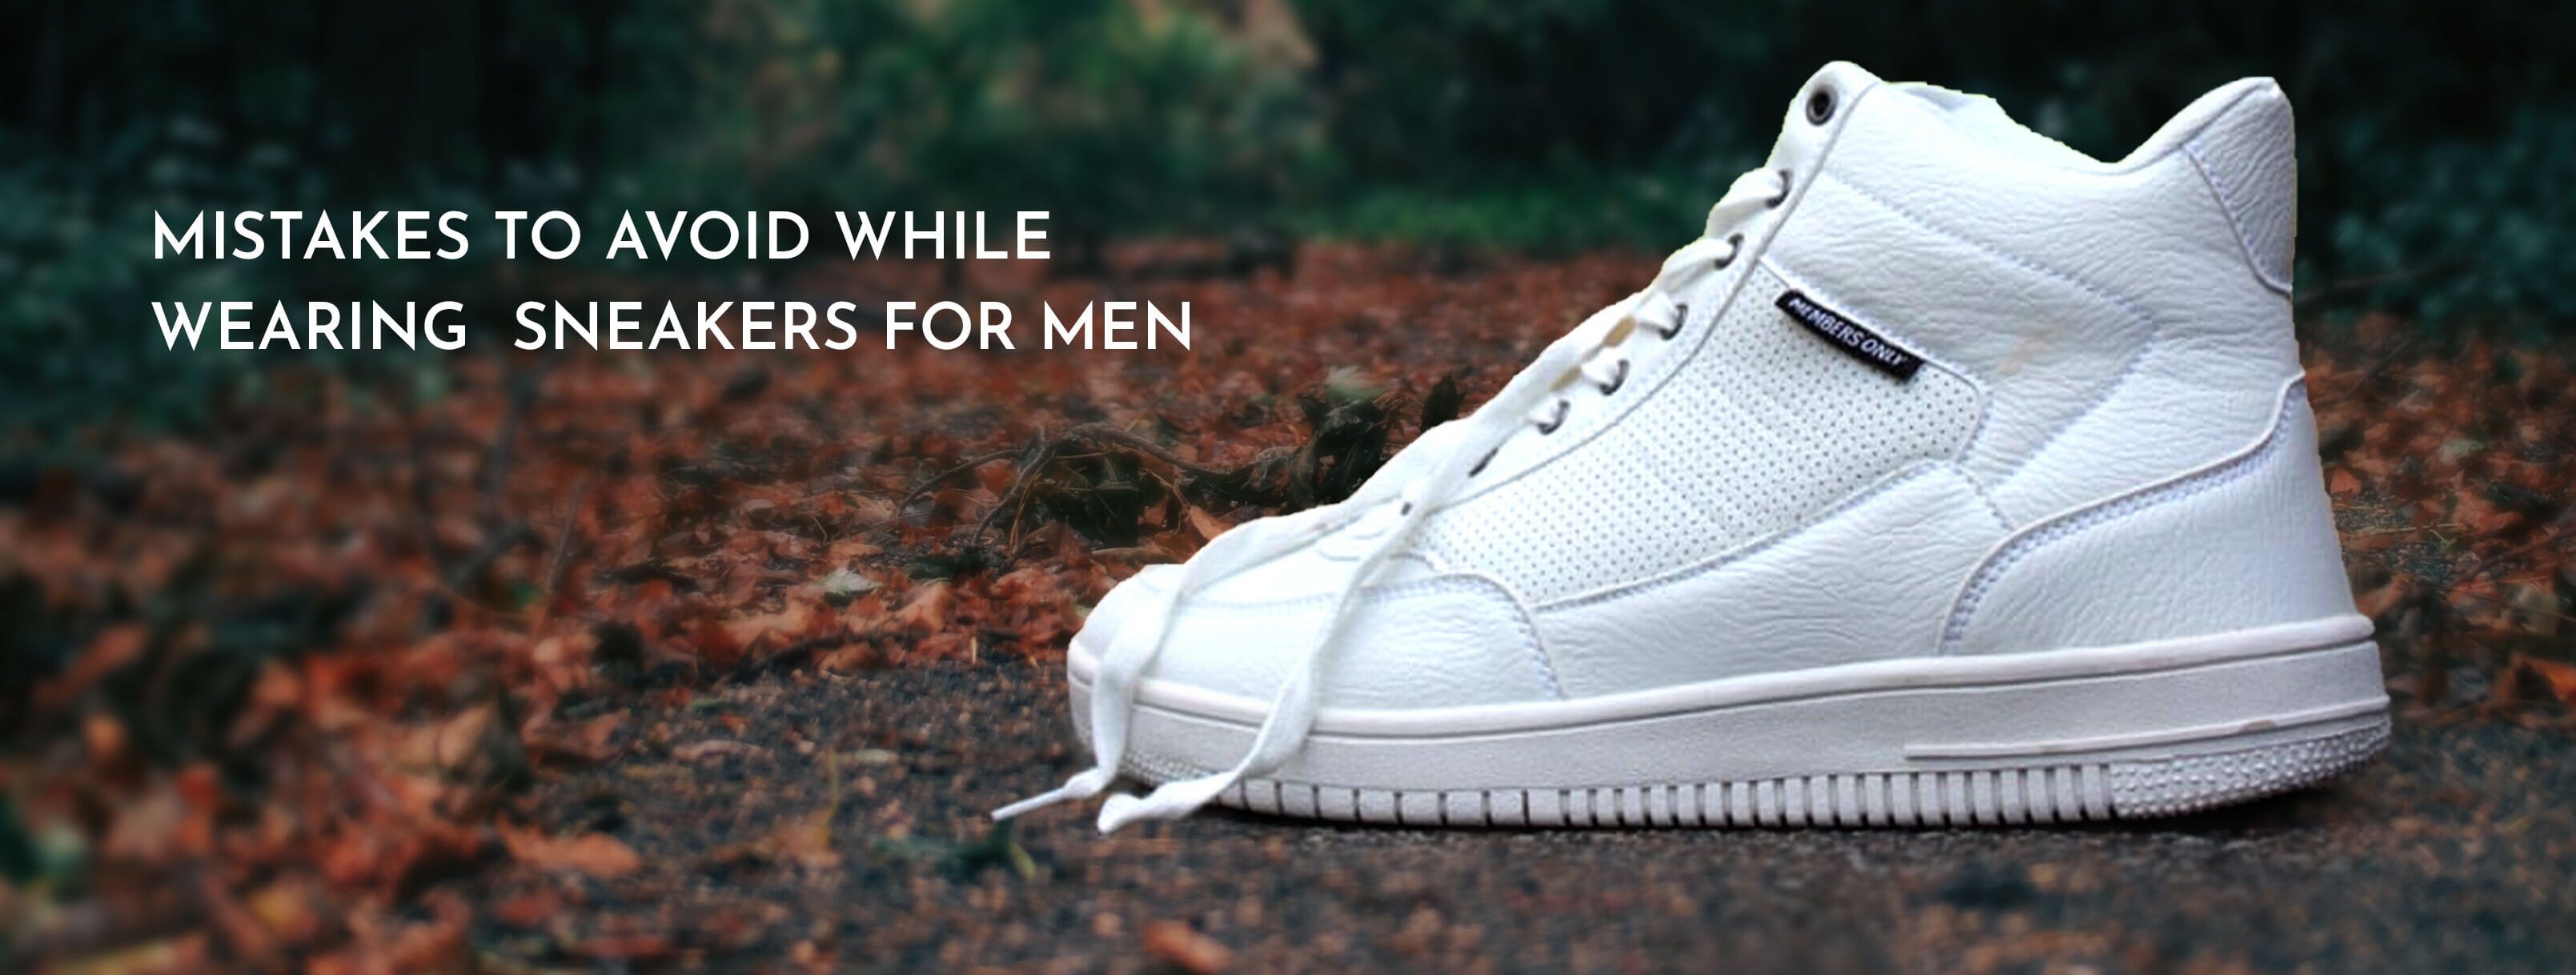 MISTAKES TO AVOID WHILE WEARING  SNEAKERS FOR MEN